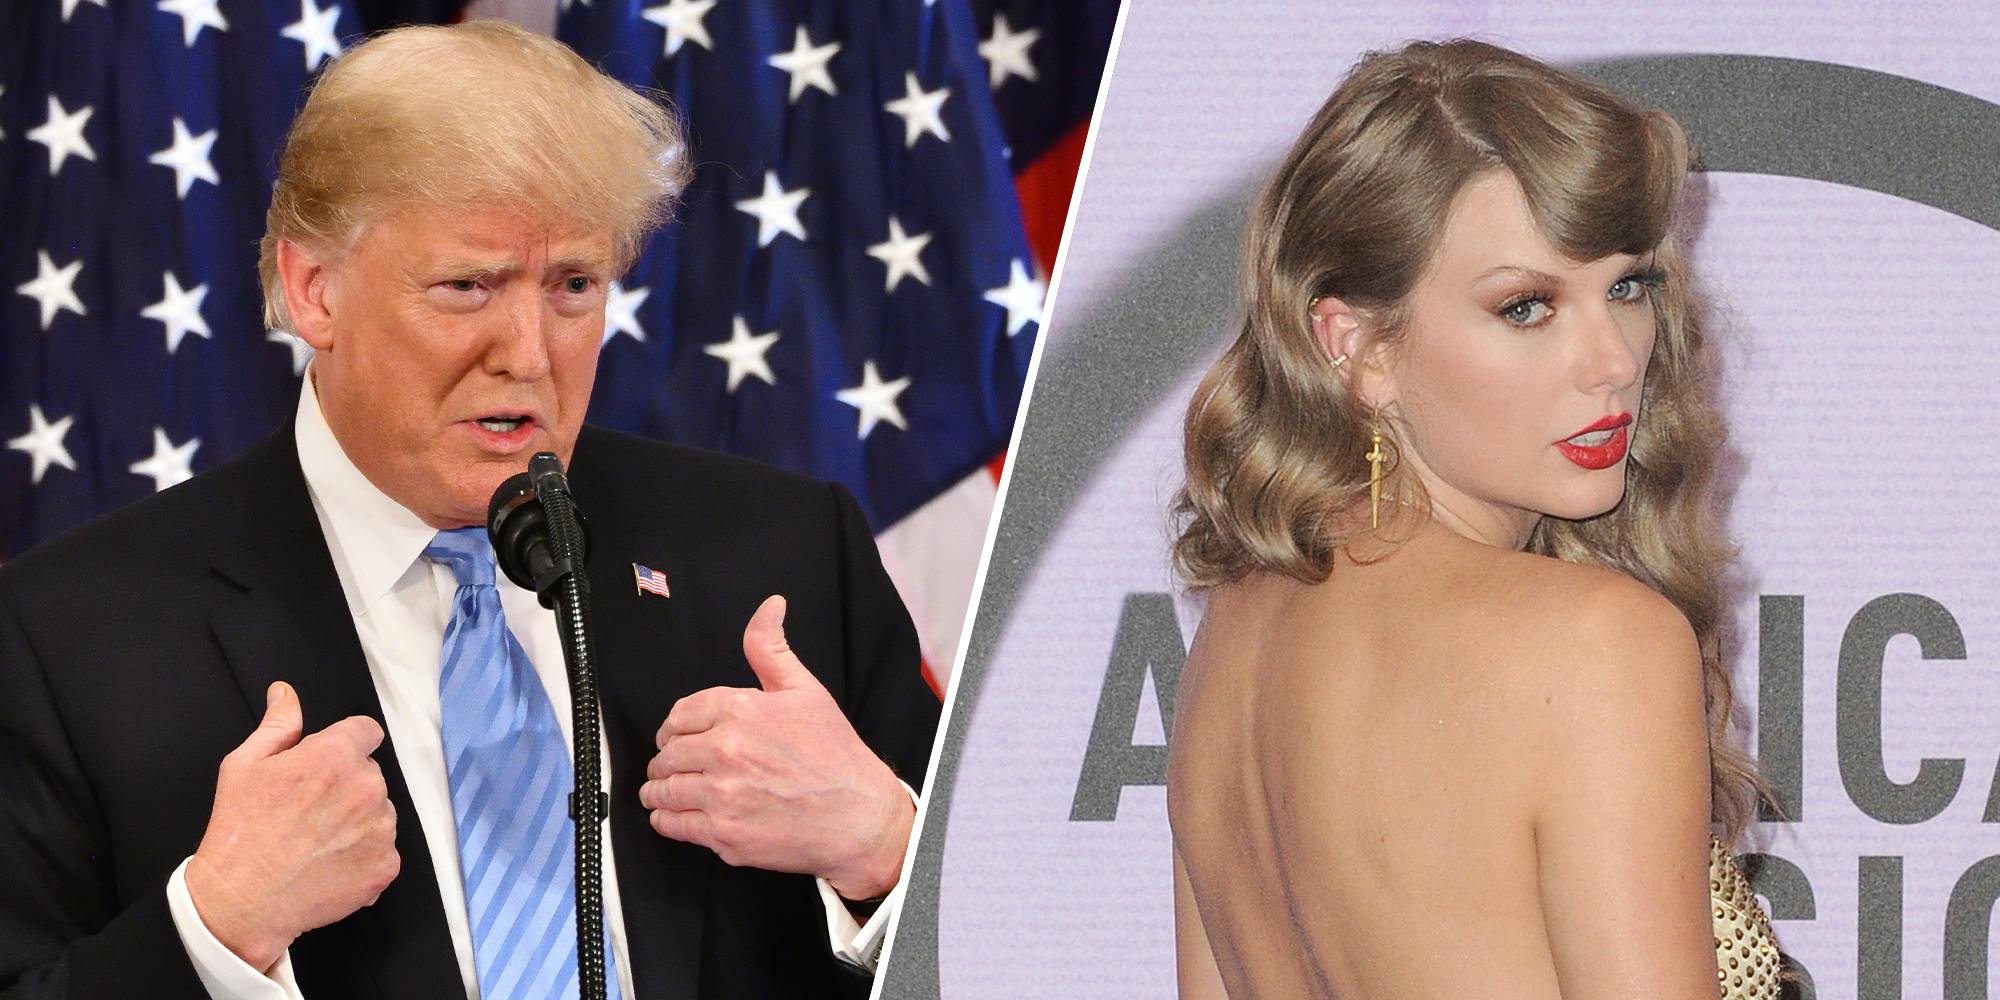 Did Taylor Swift call out Trump on X